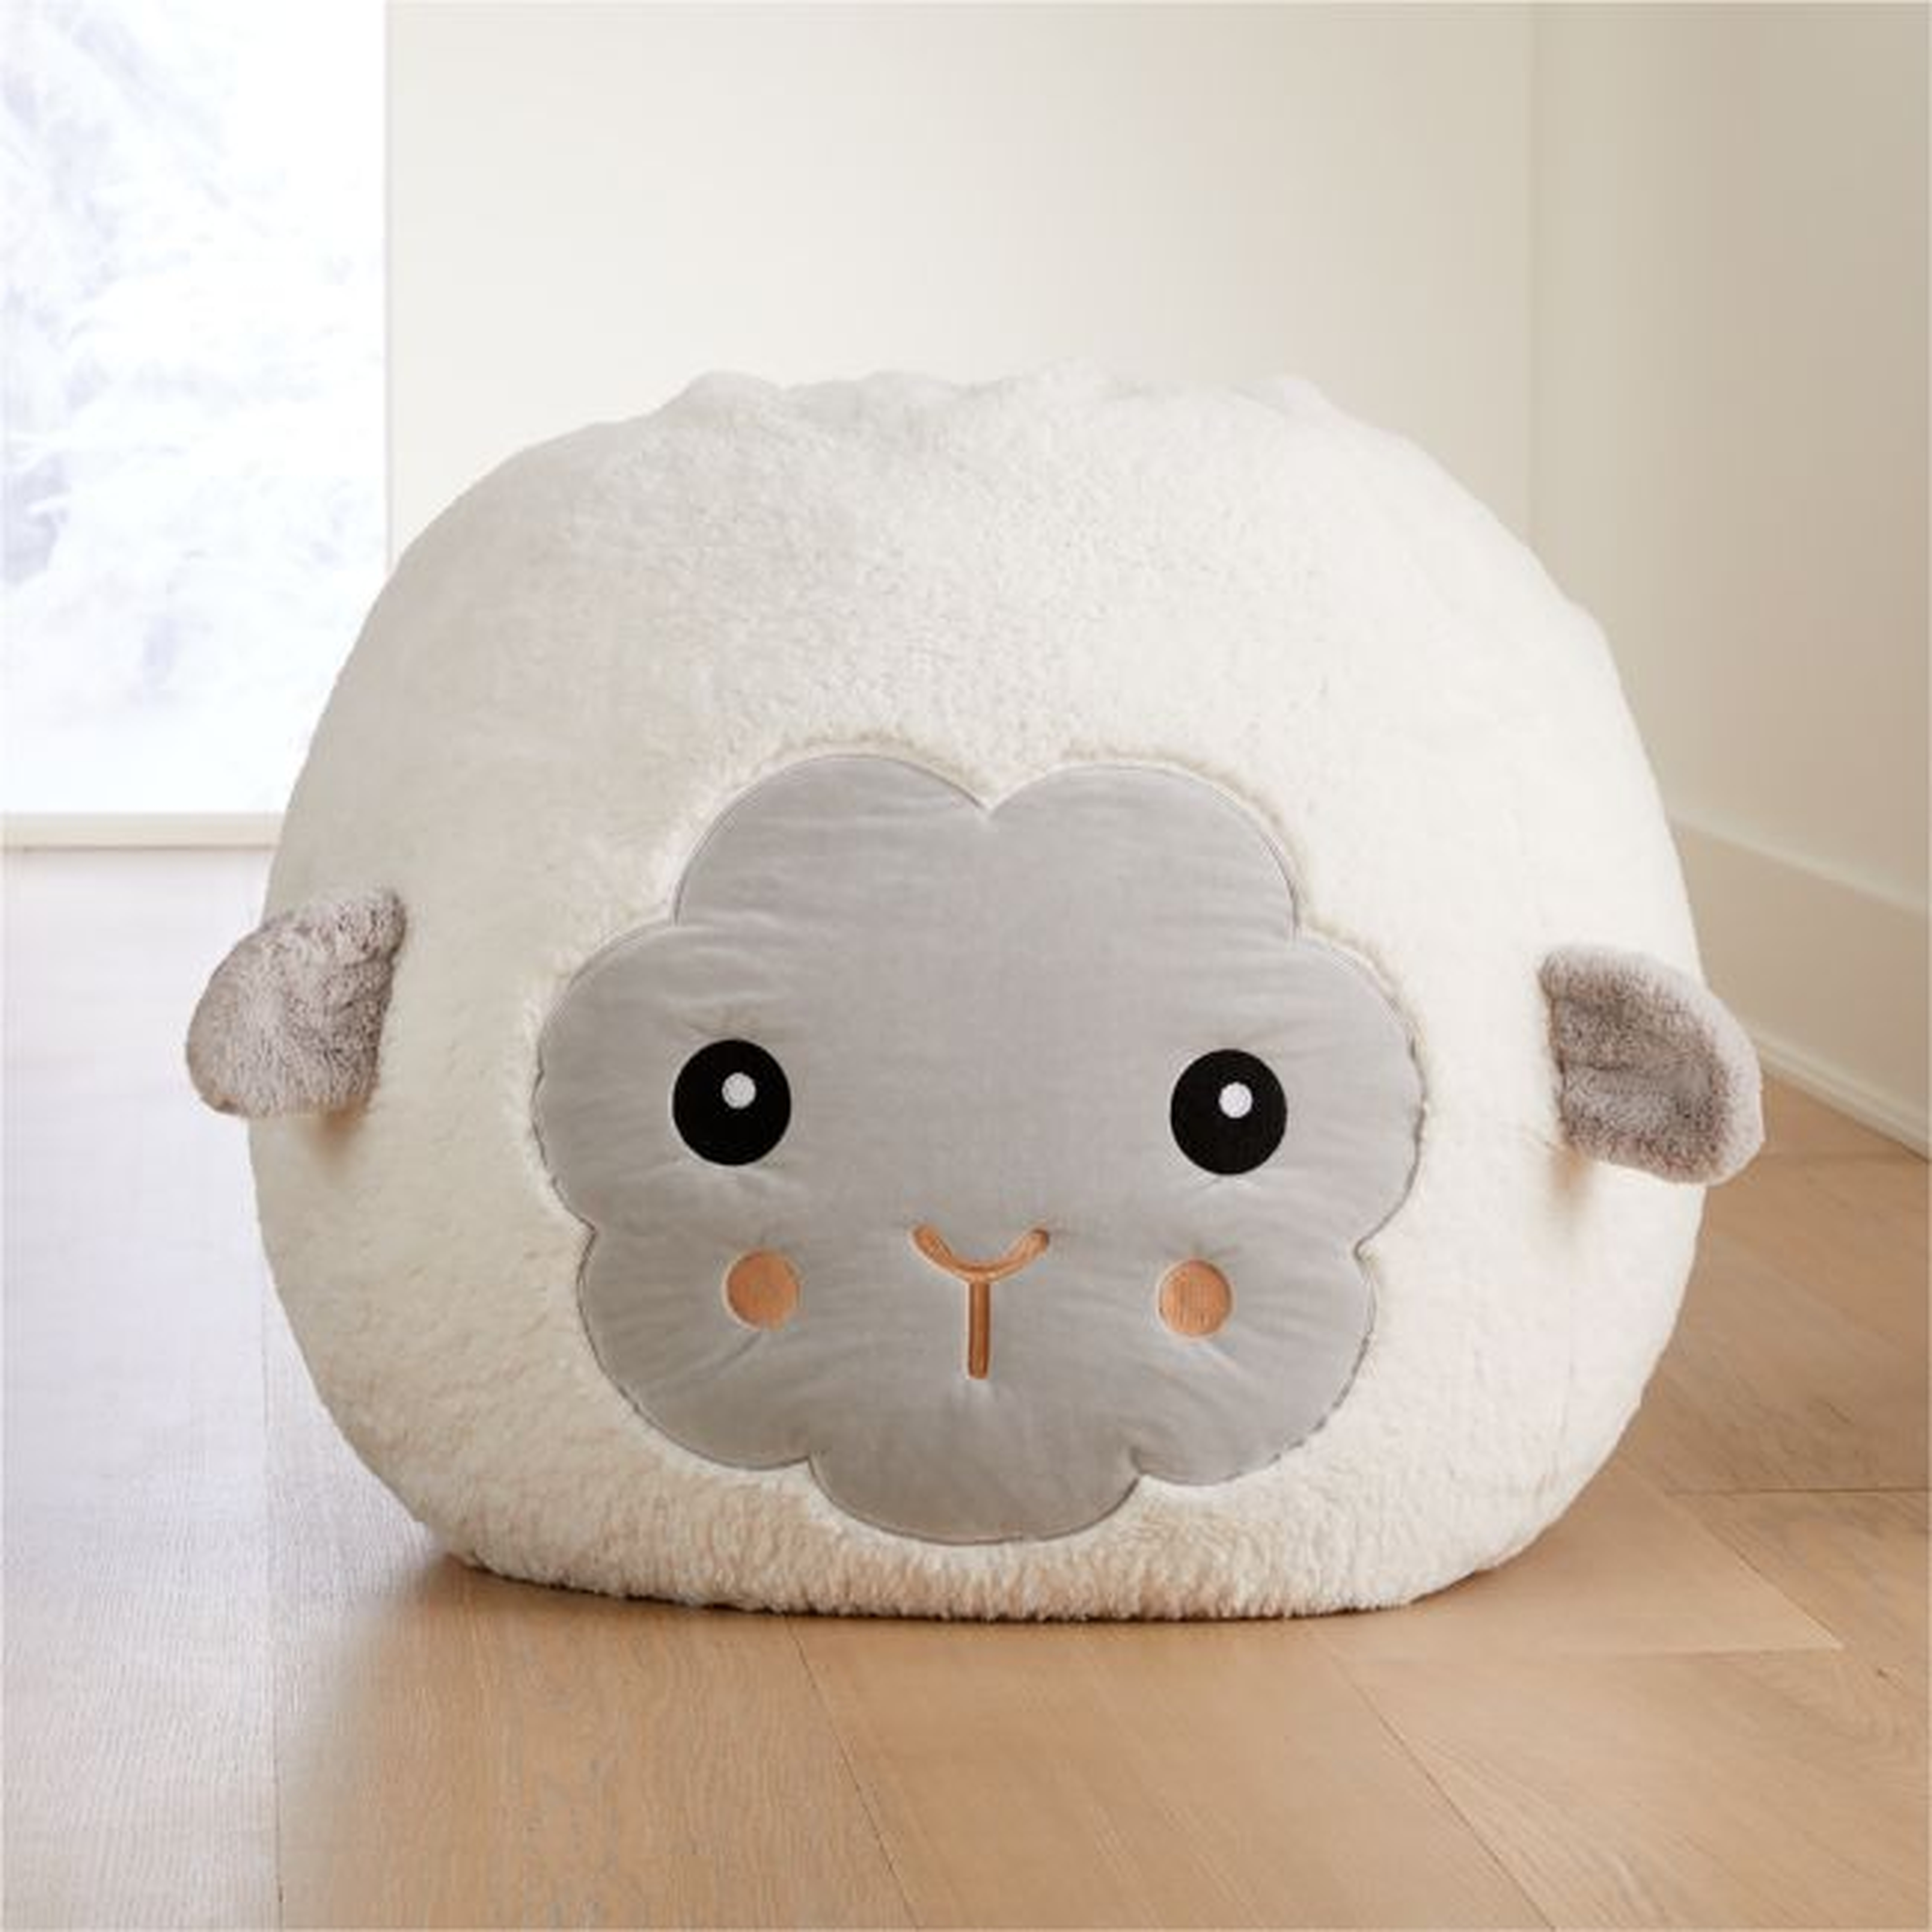 Large Furry Sheep Bean Bag Chair - Crate and Barrel